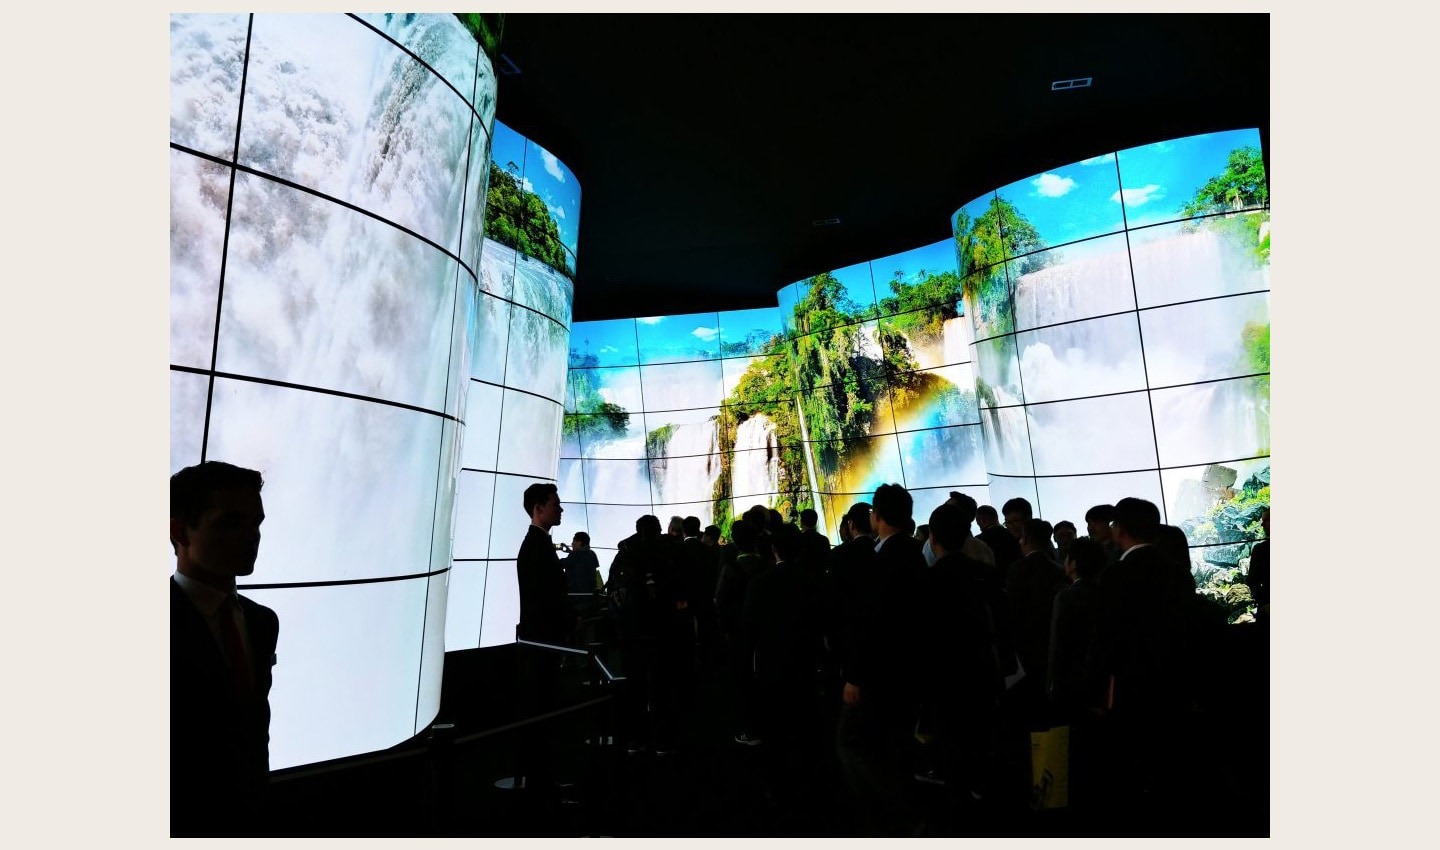 People standing before the entrance of the LG OLED Canyon, which displays a huge waterfall